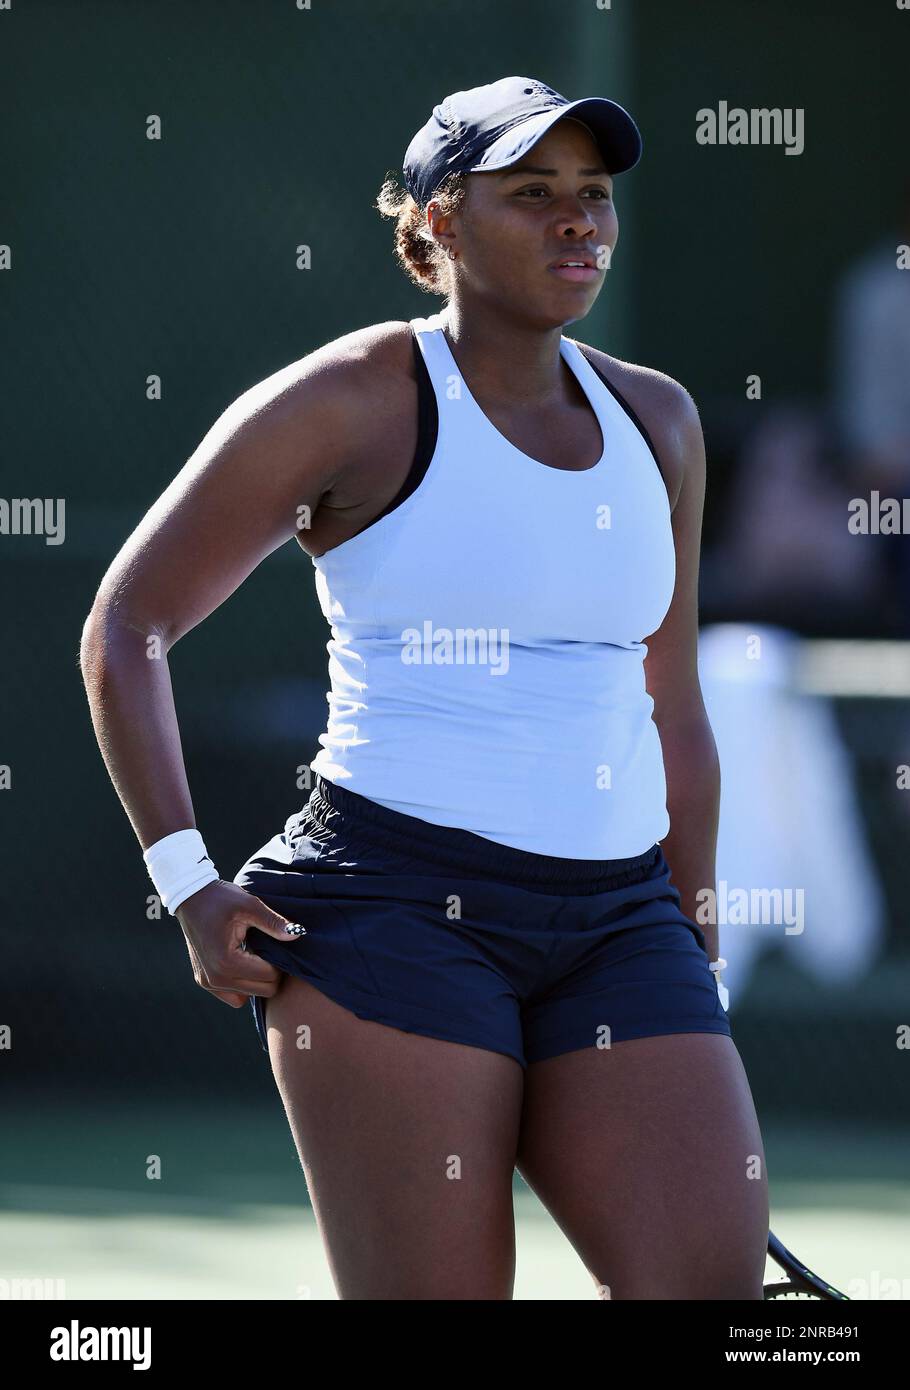 NEWPORT BEACH, CA - JANUARY 29: WTA tennis player Taylor Townsend (USA) on  the court in a match during the Oracle Challenger Series played on January  29, 2020 at the Newport Beach